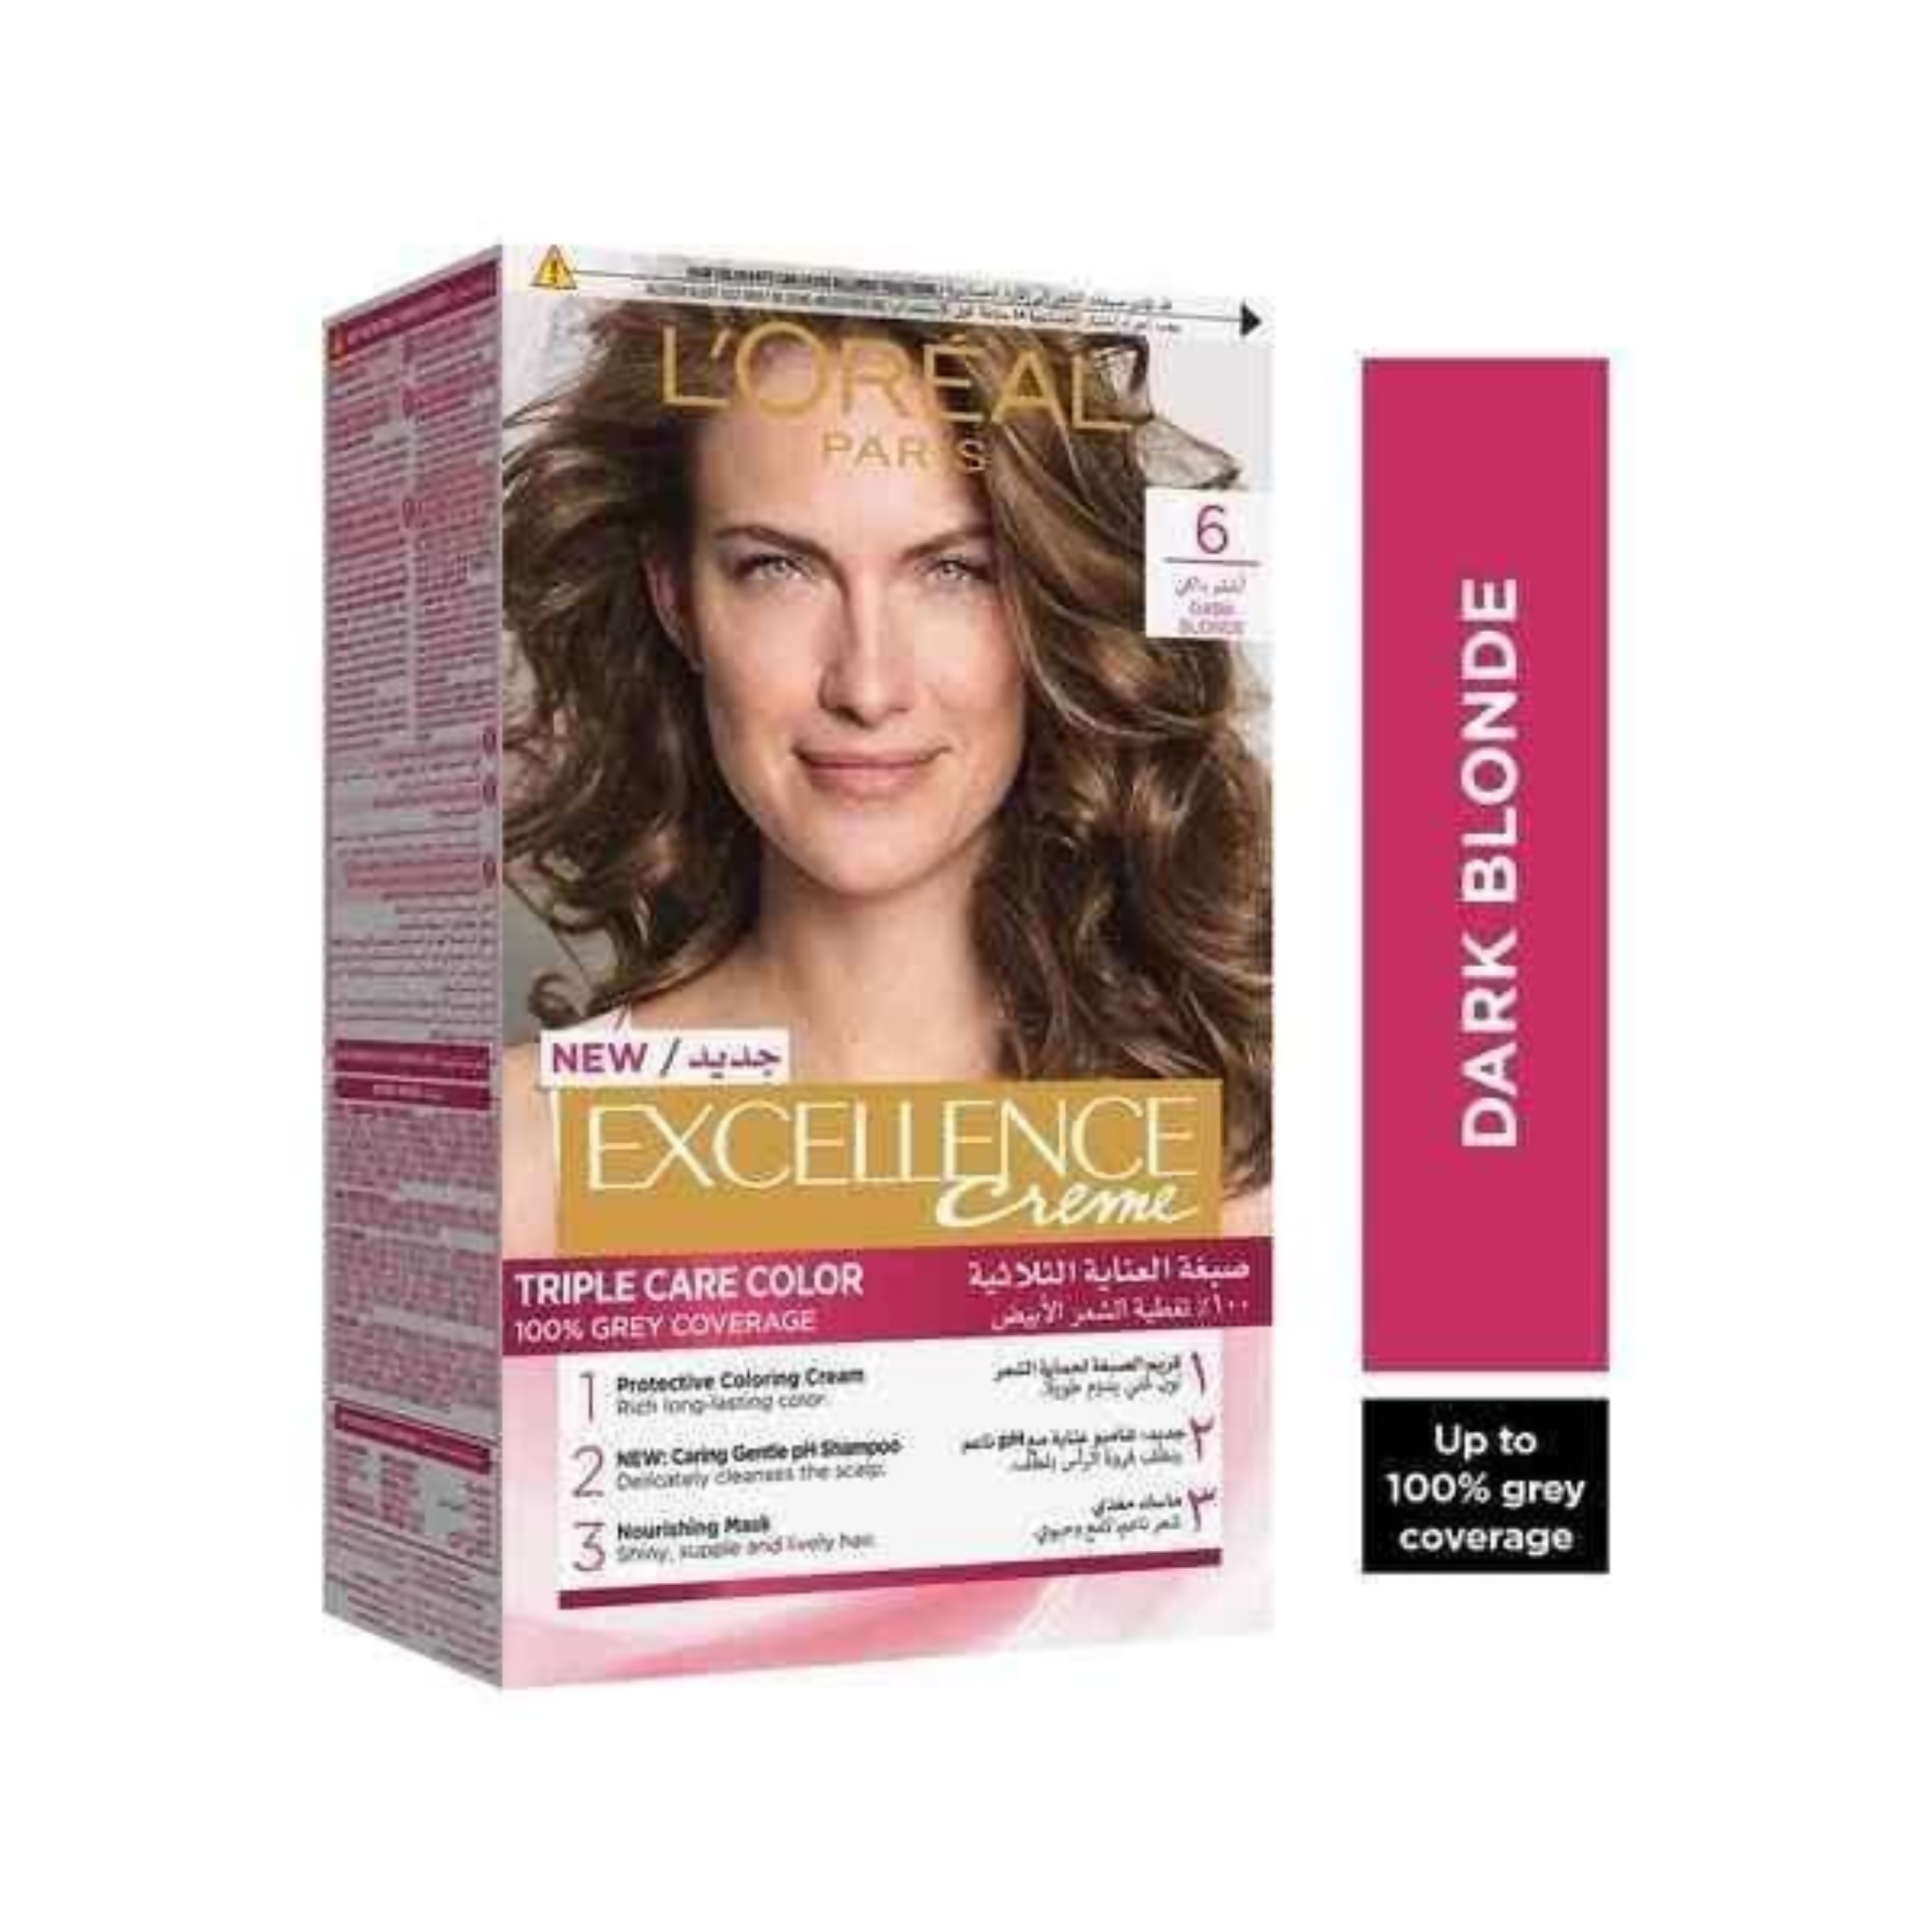 Loreal Excellence, Elevate Your Hair Color to Perfection